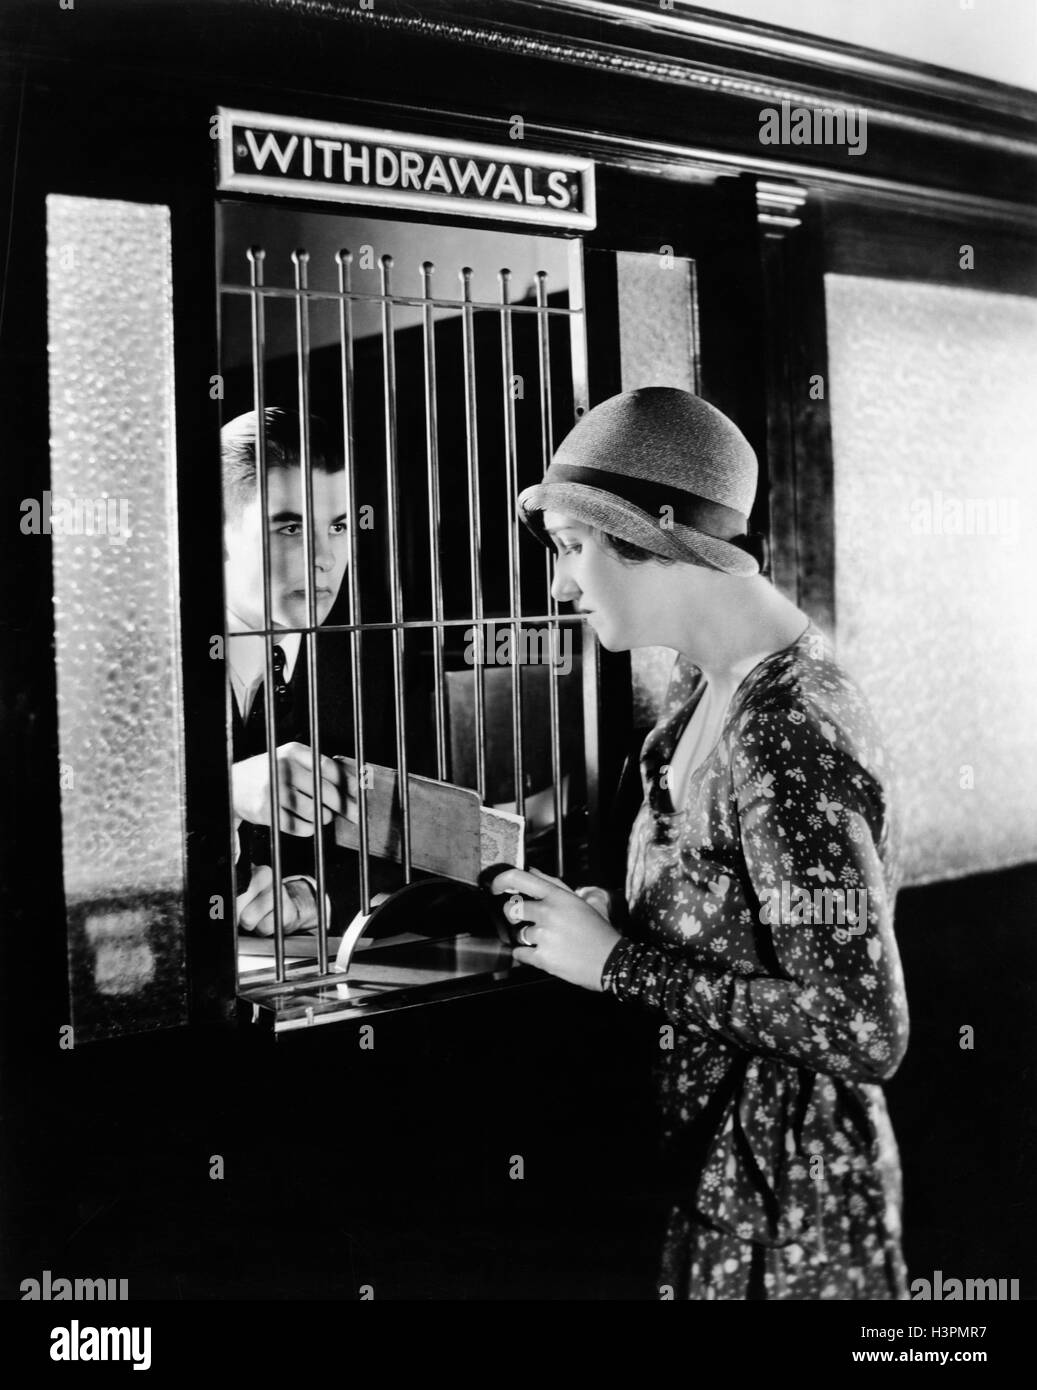 1920s 1930s WOMAN MAKING A CASH WITHDRAWAL FROM MALE BANK TELLER Stock Photo